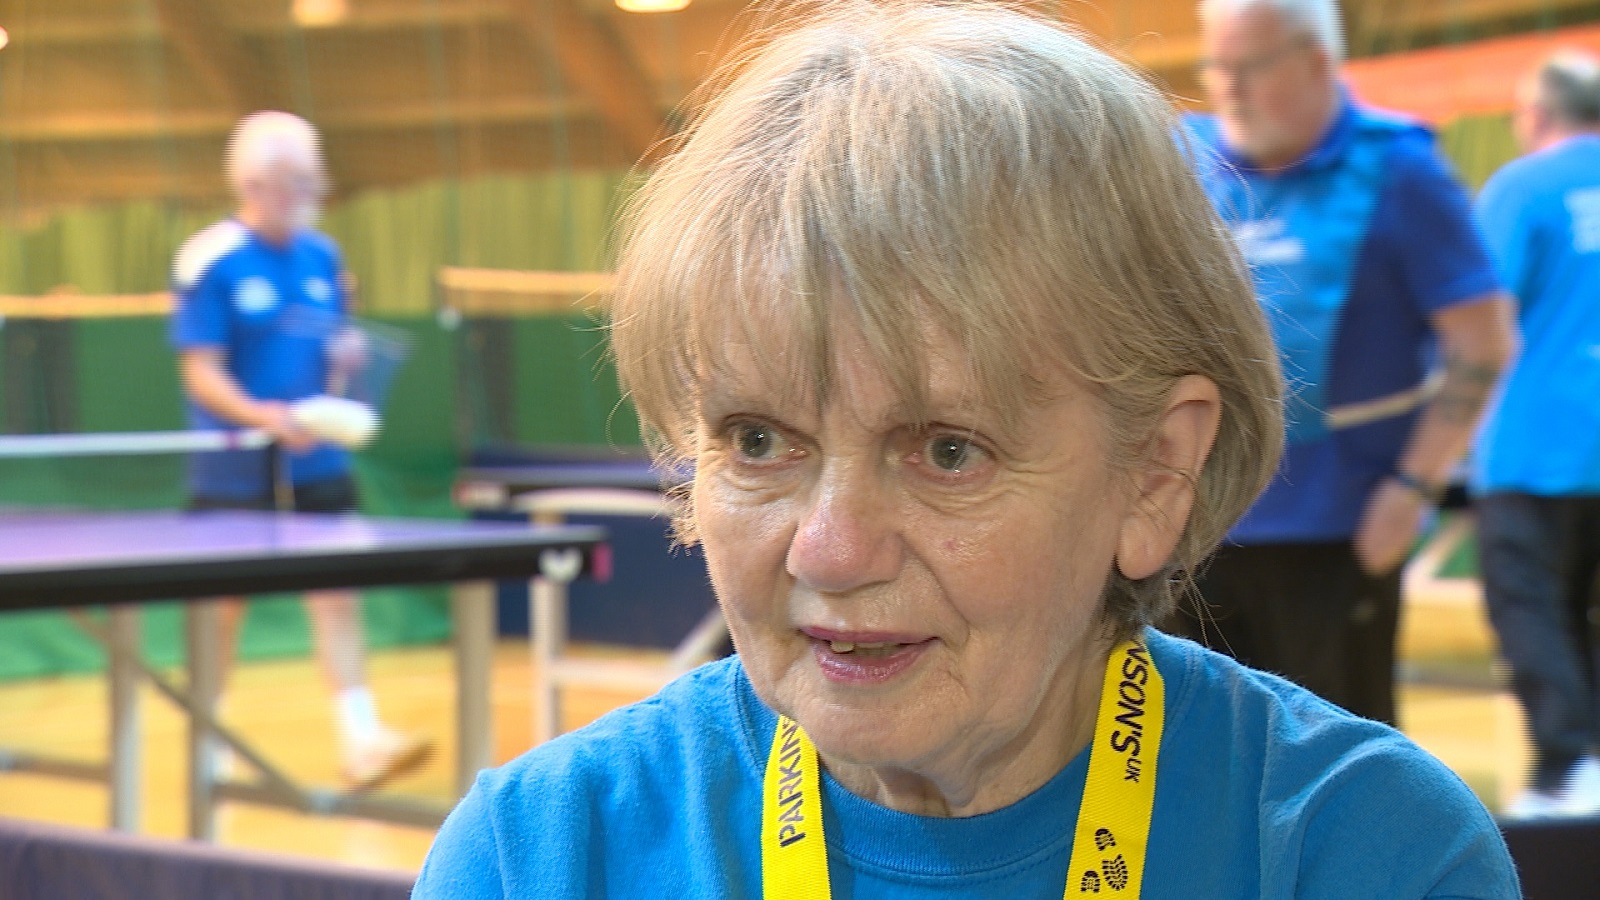 Doreen Brown has lived with Parkinson's disease for 15 years.